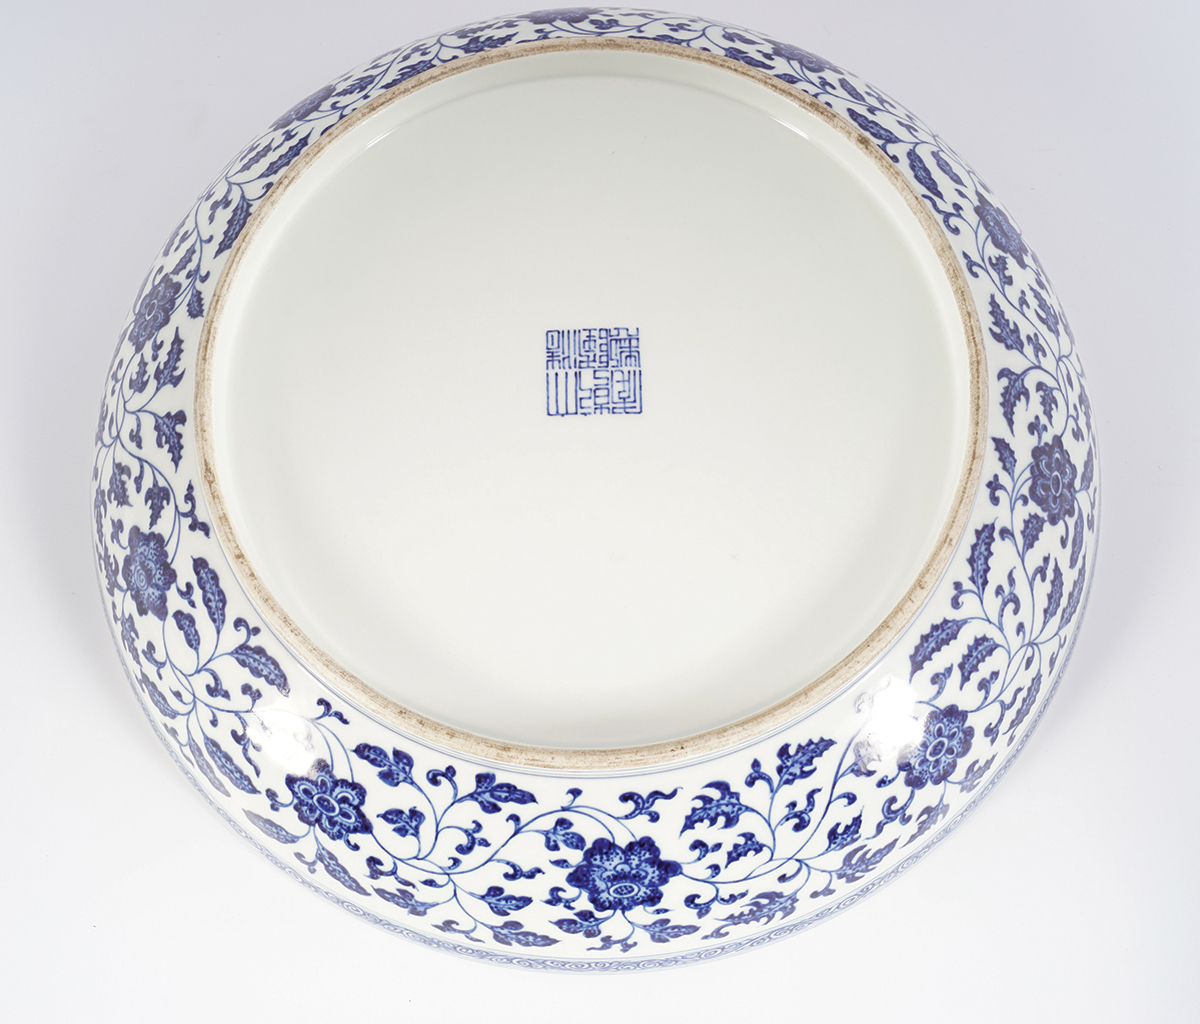 CHINESE QING PERIOD BLUE AND WHITE CHARGER - Image 6 of 7